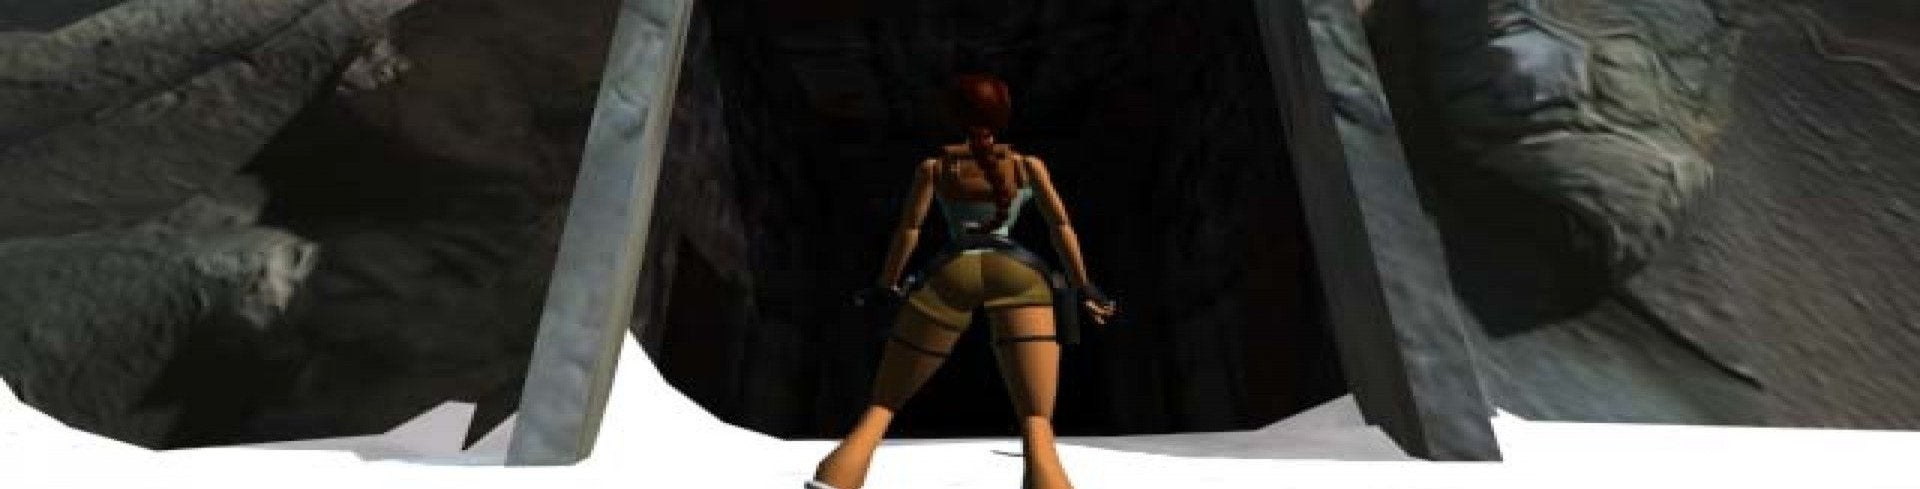 Image for PS1 at 20: Lara Croft ran for the student union at my university